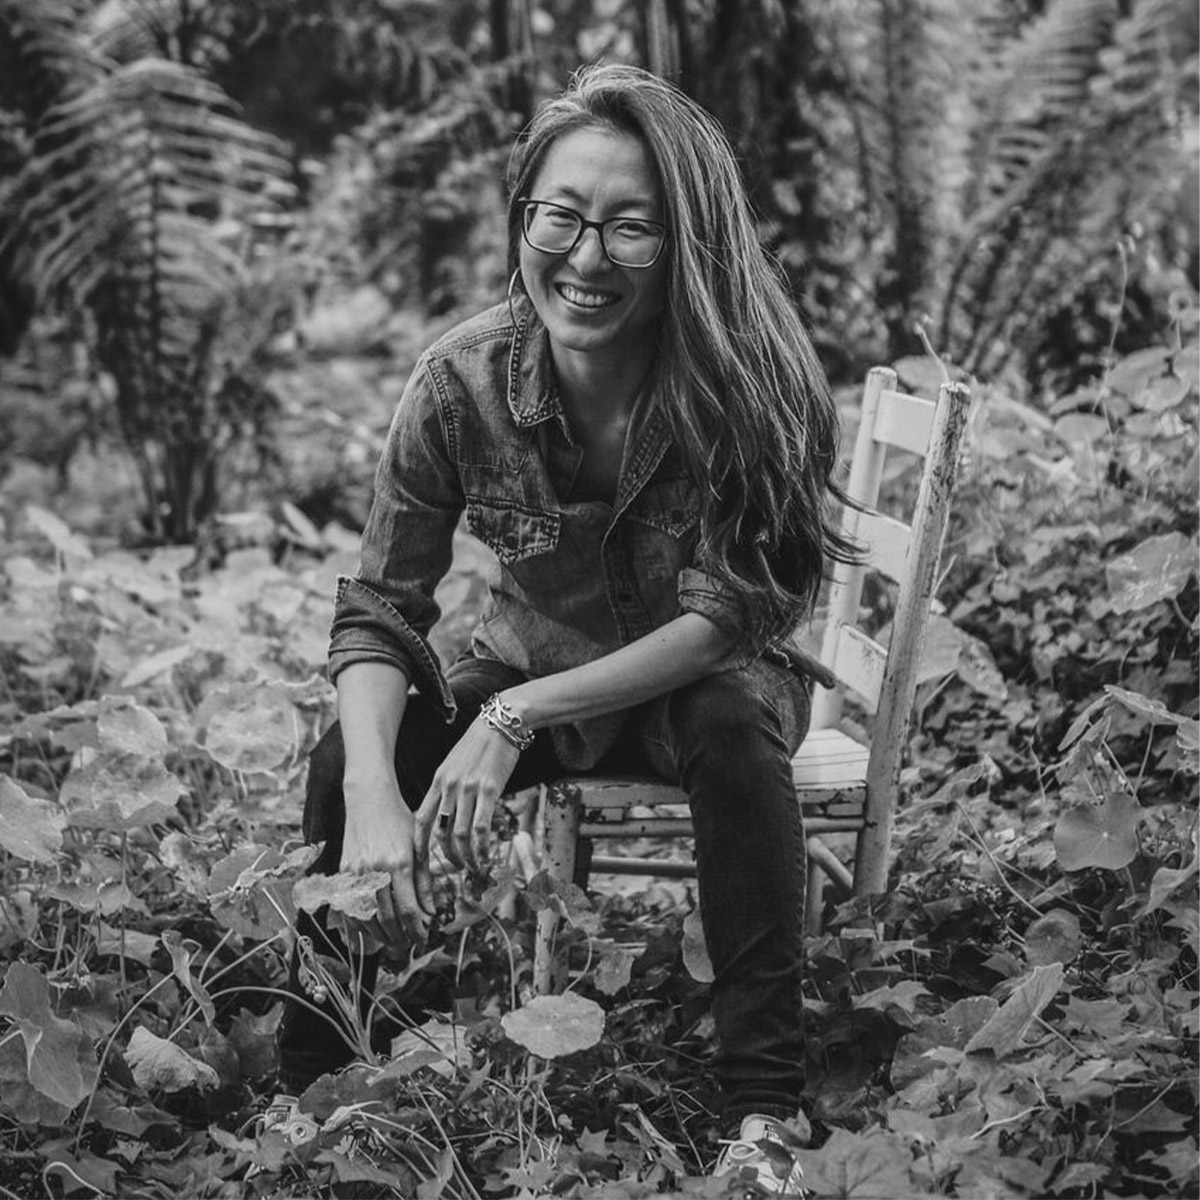 Mia Mingus black and white portrait. Mia is a Korean person smiling with long hair slung over one side of her face, large glasses and large hoop earrings. Mia is seated at the edge of a wooden kitchen-style chair in what looks like the middle of the woods.